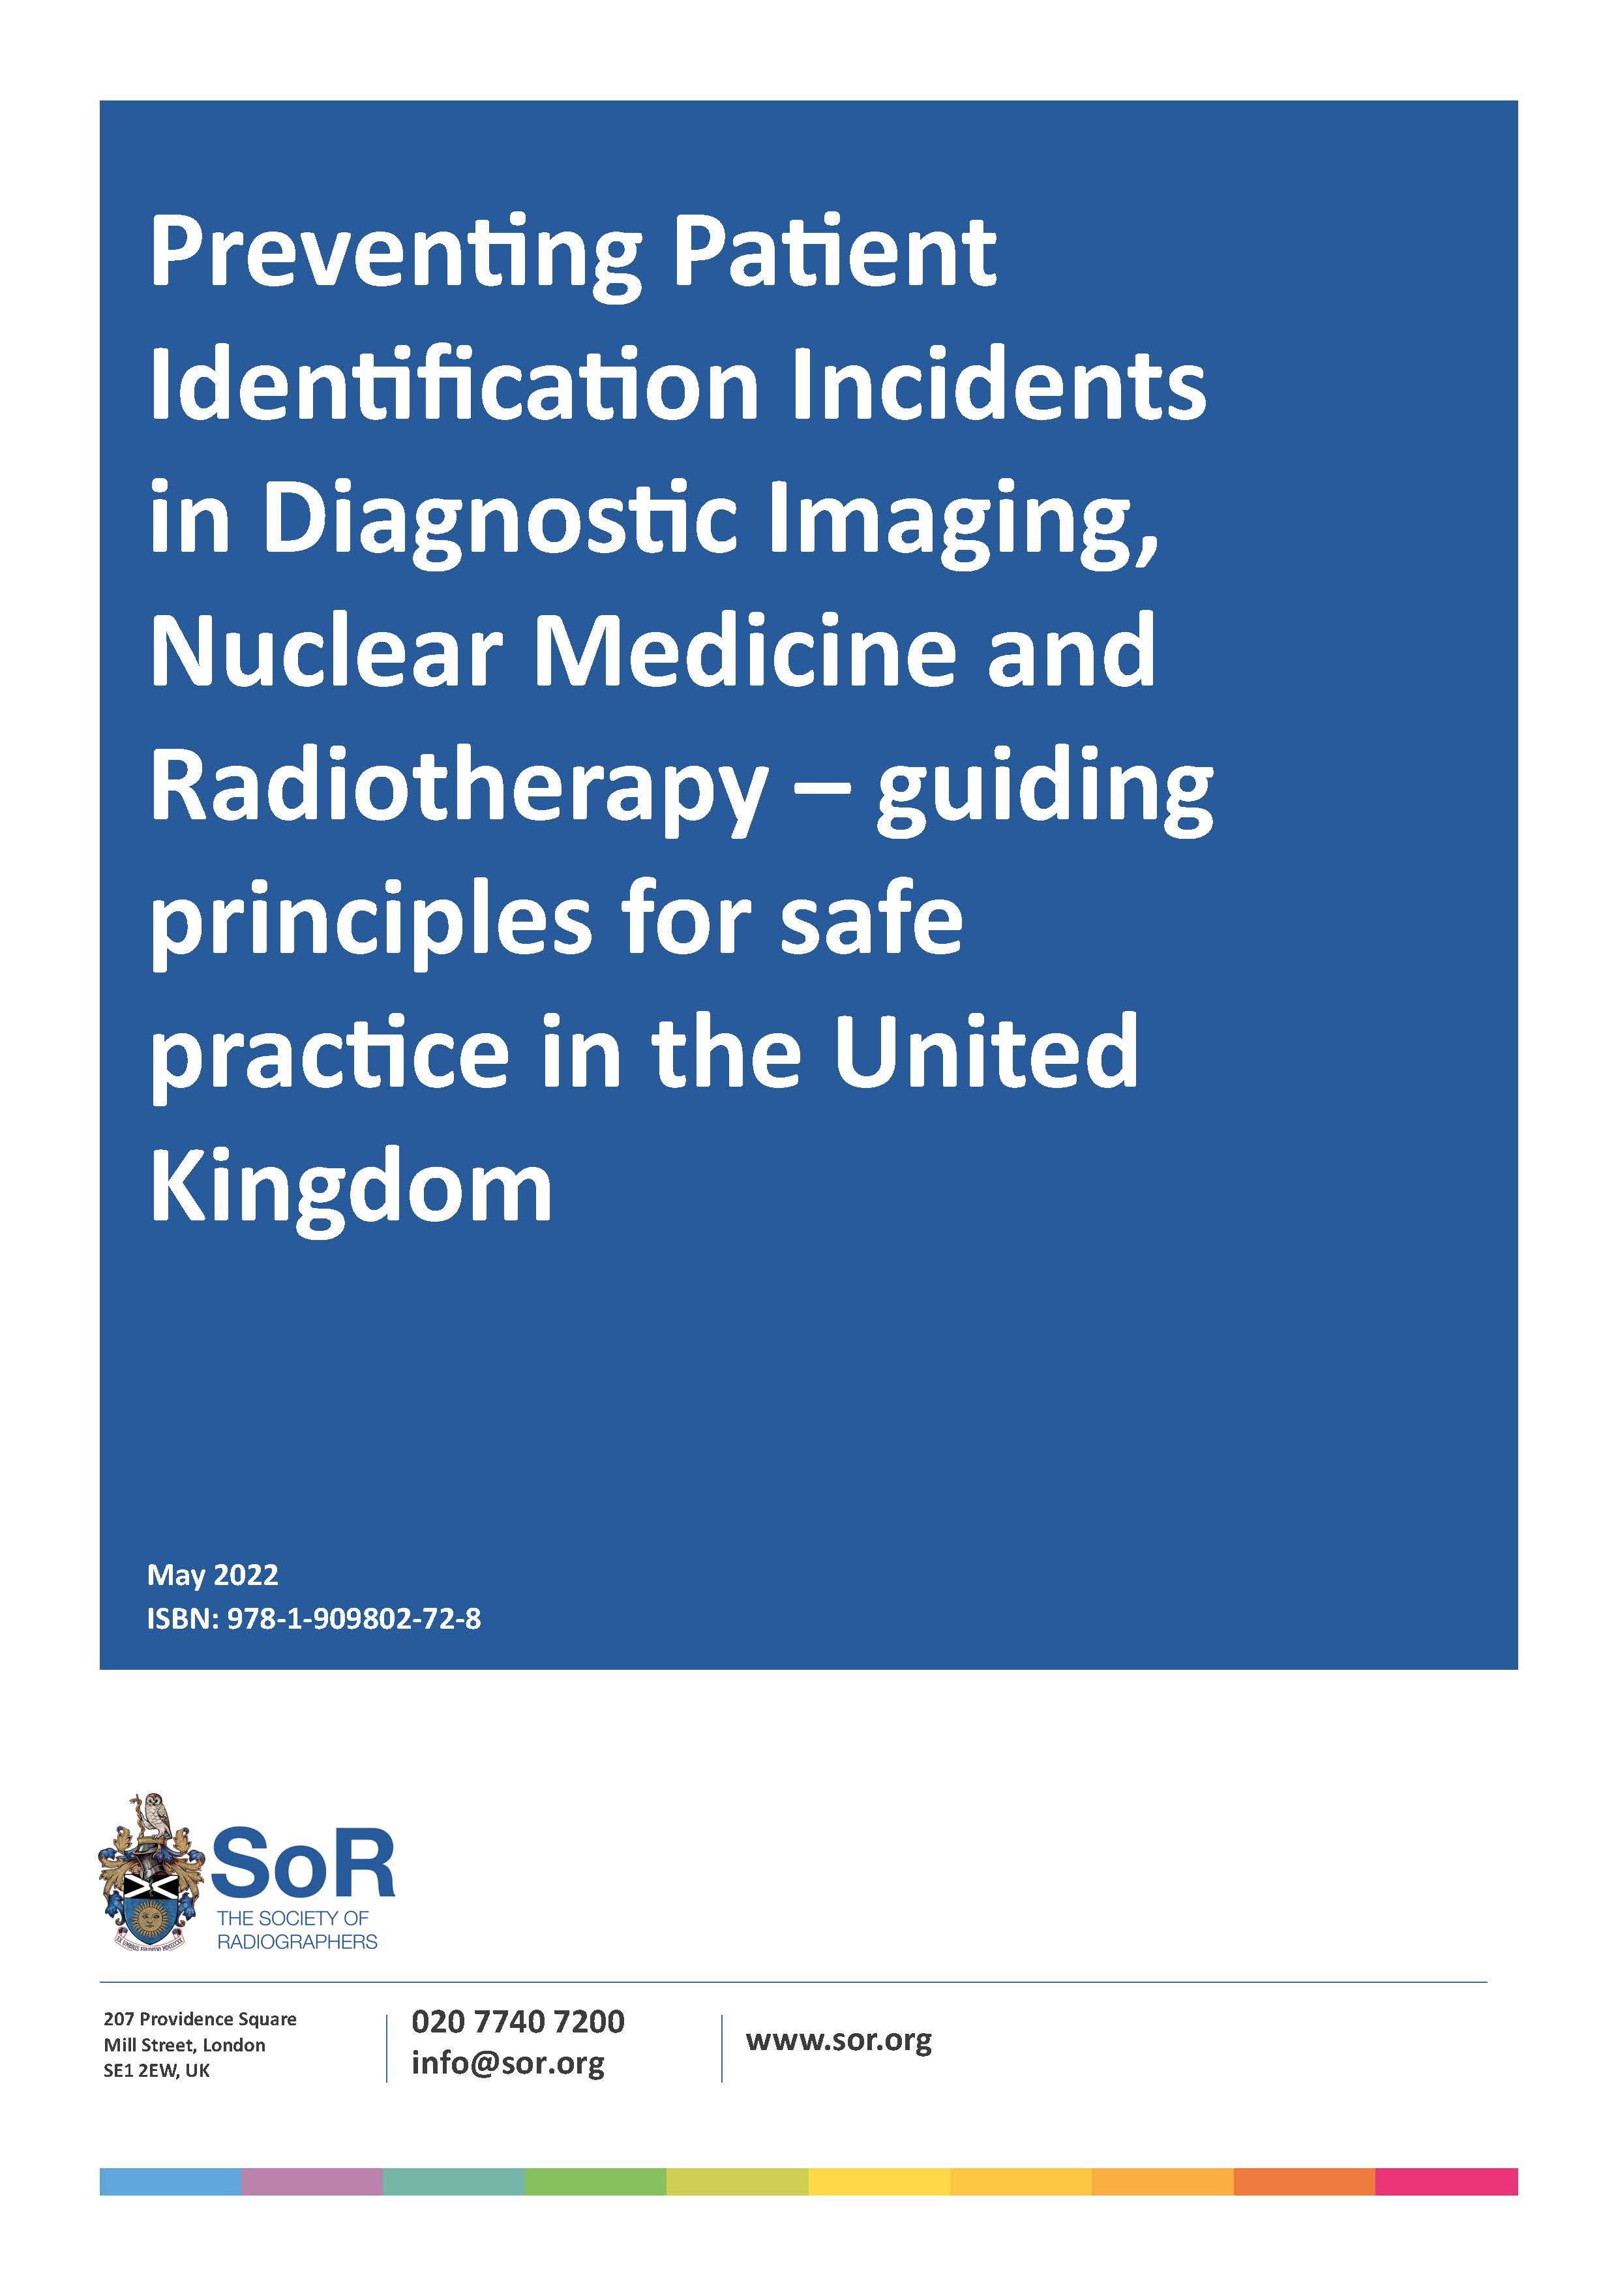 Preventing Patient Identification Incidents in Diagnostic Imaging, Nuclear Medicine and Radiotherapy – guiding principles for safe practice in the United Kingdom